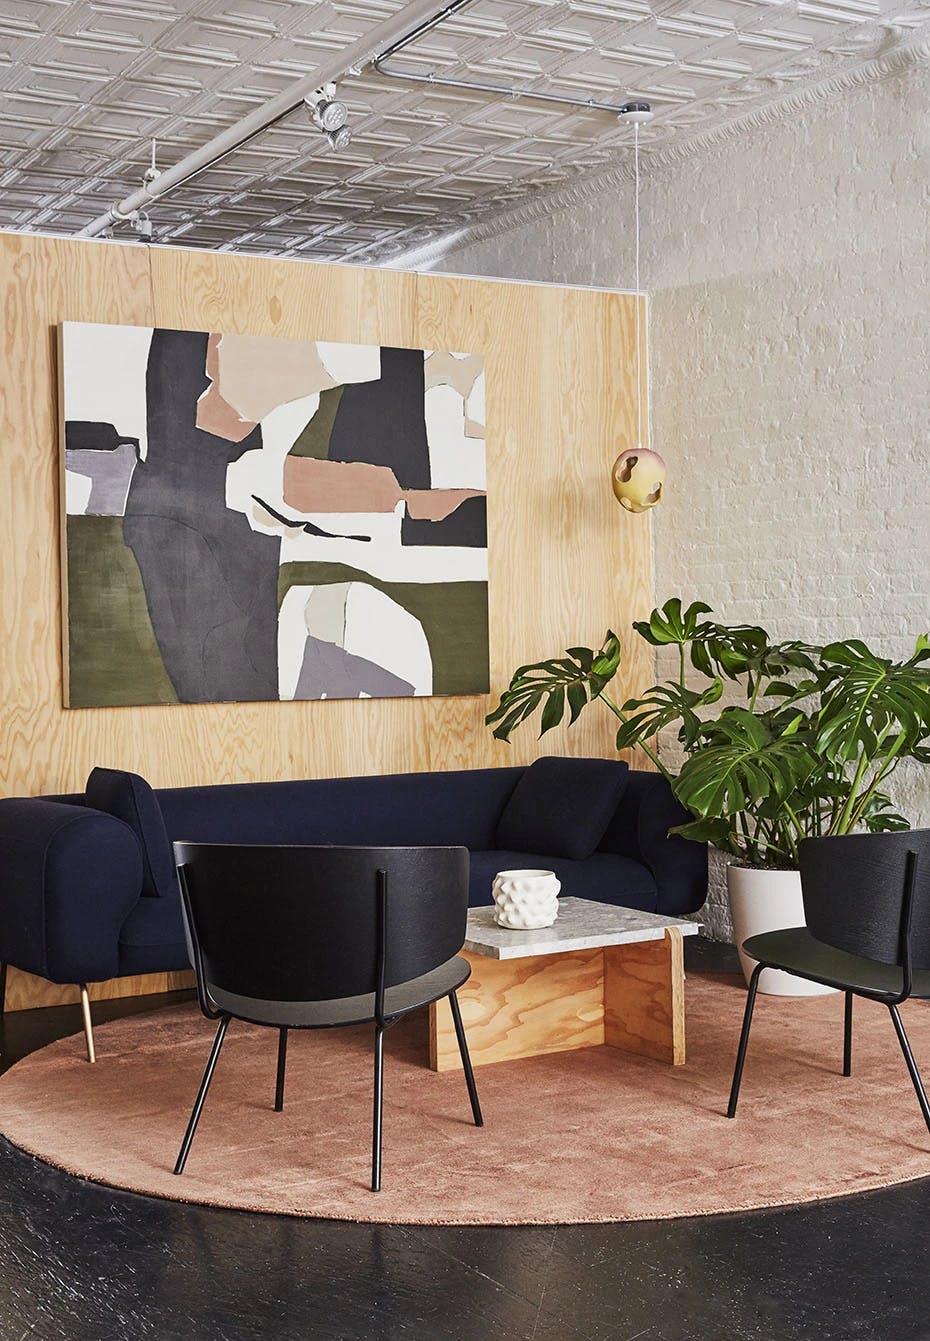 The lounge area at Uprise Art featuring a round, red rug, two black chairs, large monstera plant, and abstract painting by Holly Addi.